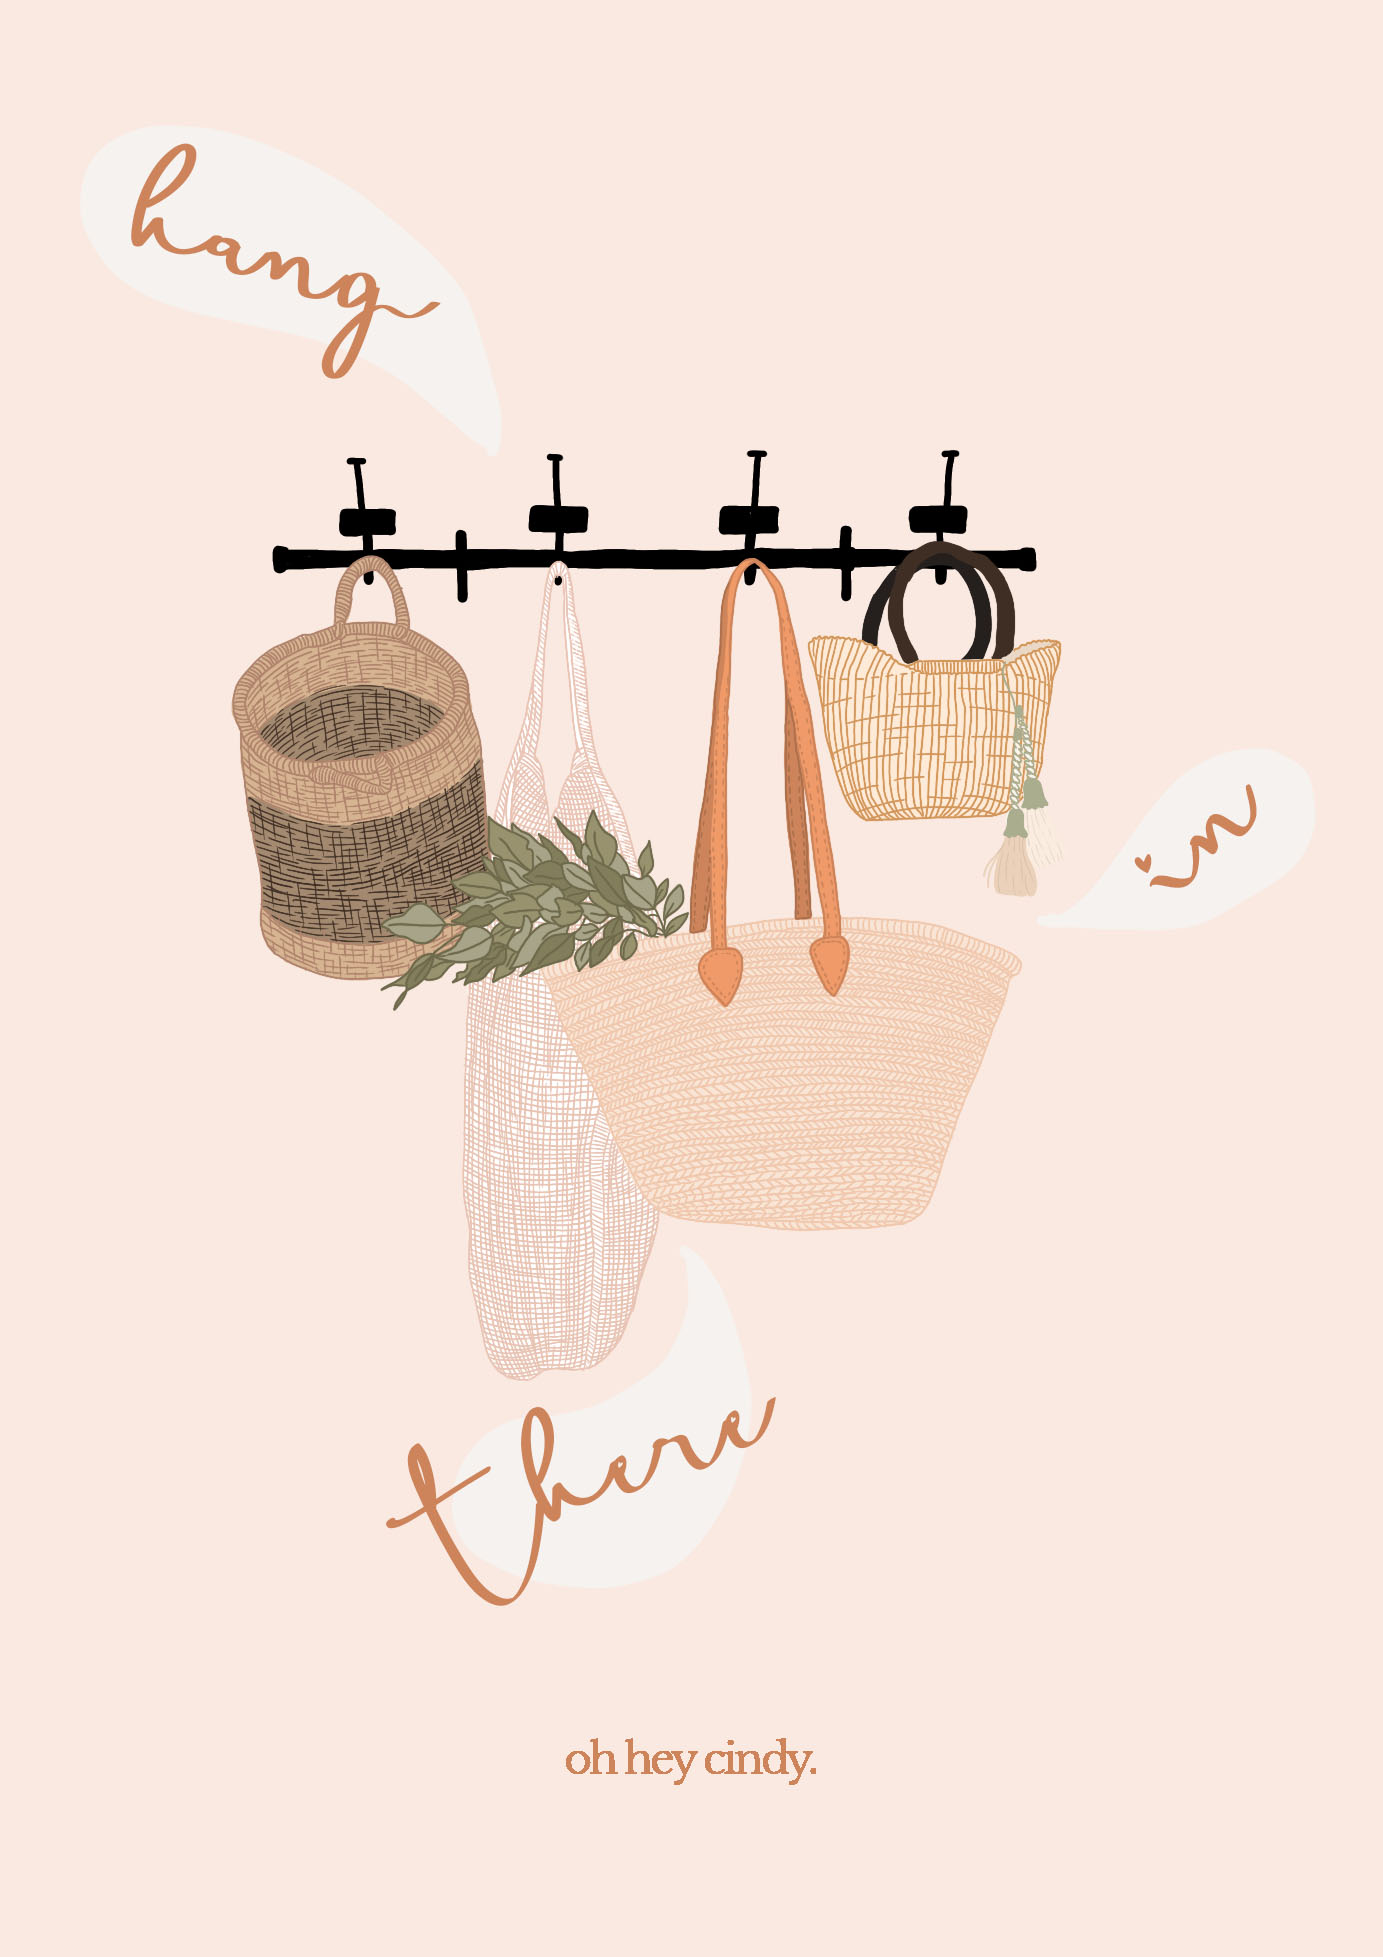 Hang in there illustration